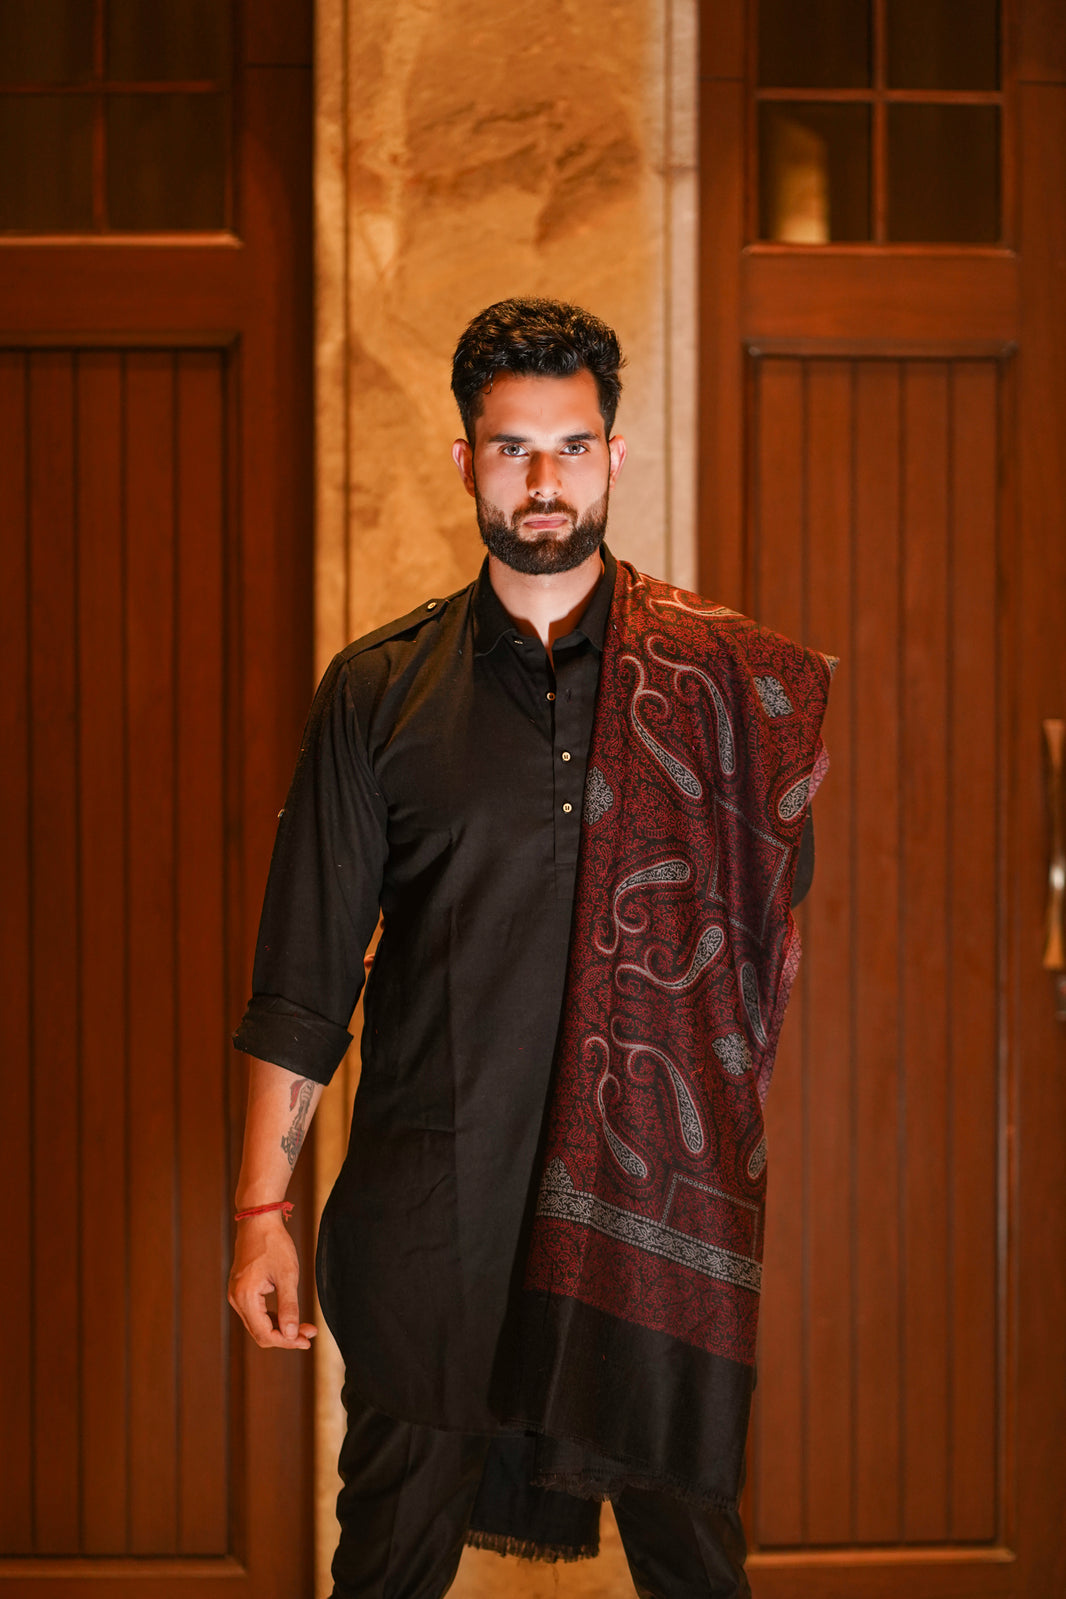 Traditional Paisley Design Wool Blend Shawl for Men - Classic Black